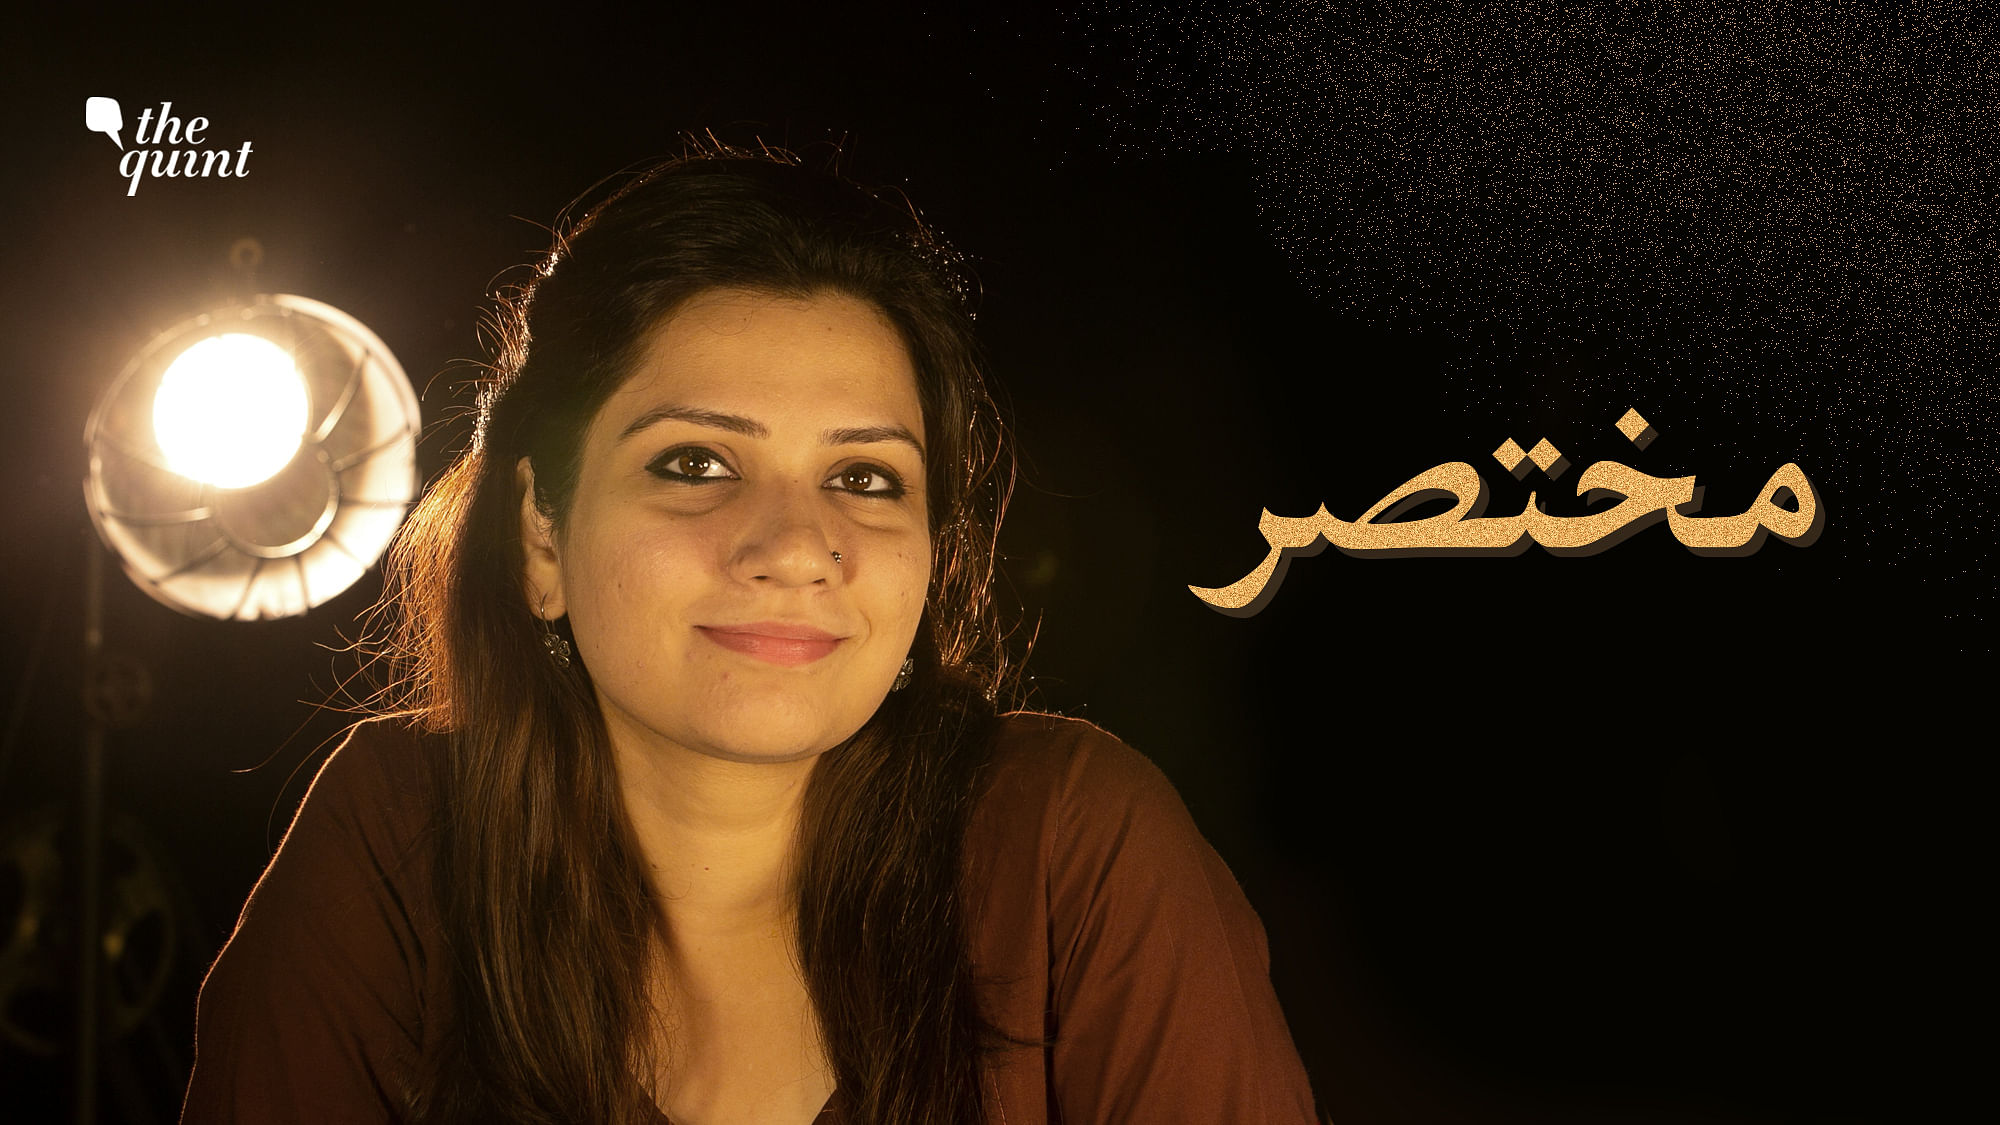 Watch the latest episode of Urdunama where The Quint’s Fabeha Syed explains the importance of everything that’s ‘Mukhtasar’ in our lives.